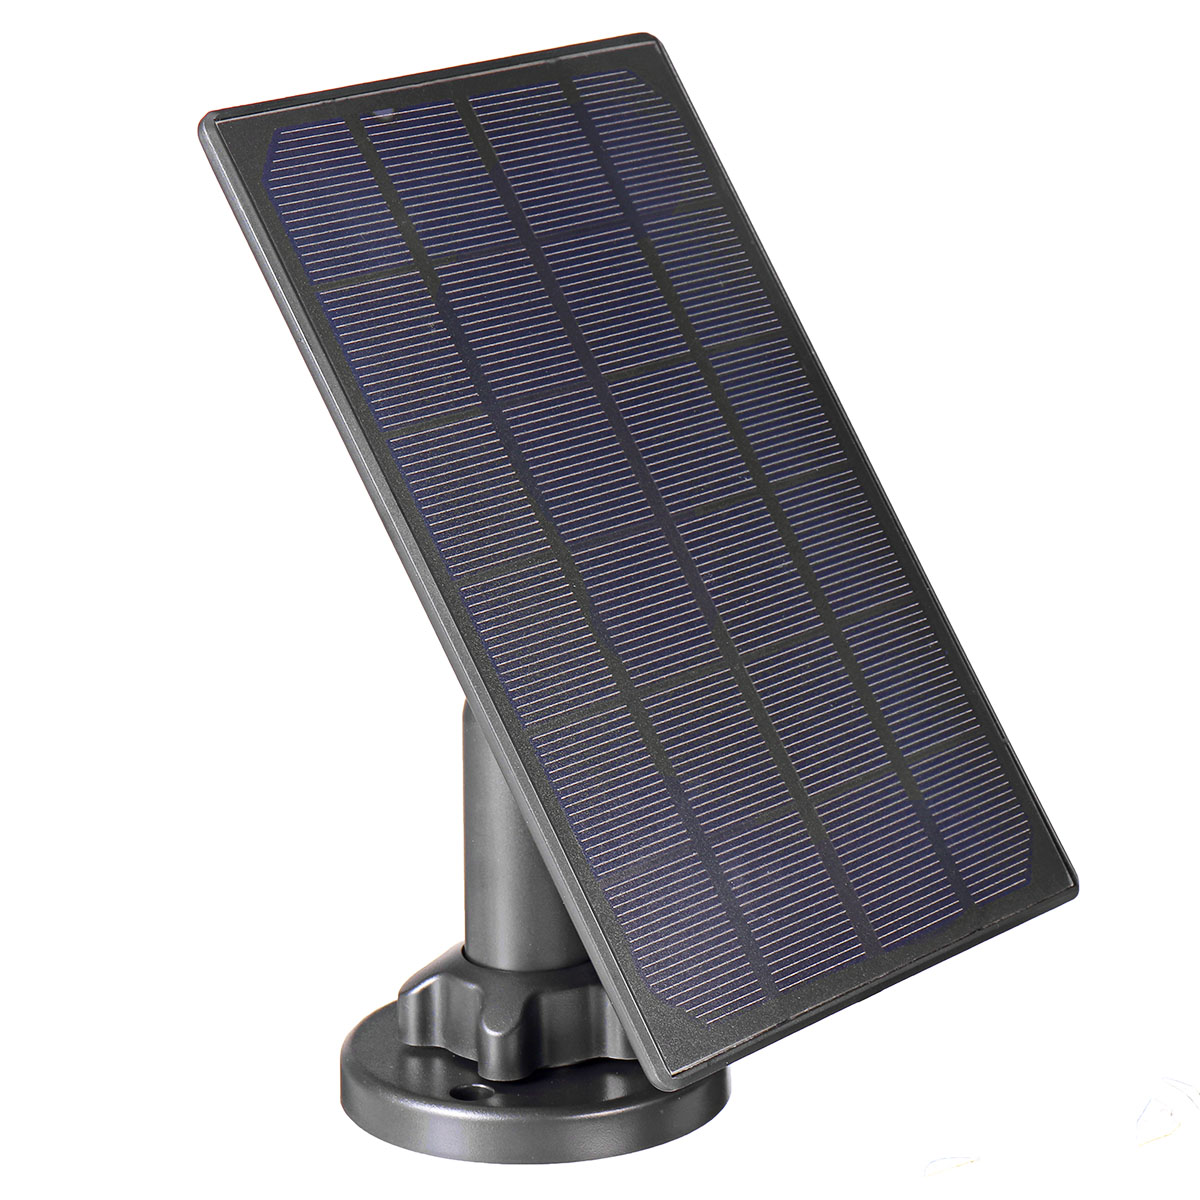 5V-High-Efficiency-Waterproof-Solar-Panel-For-Security-Camera-With-3m10Ft-Charging-Cable-for-IP-CCTV-1845858-8